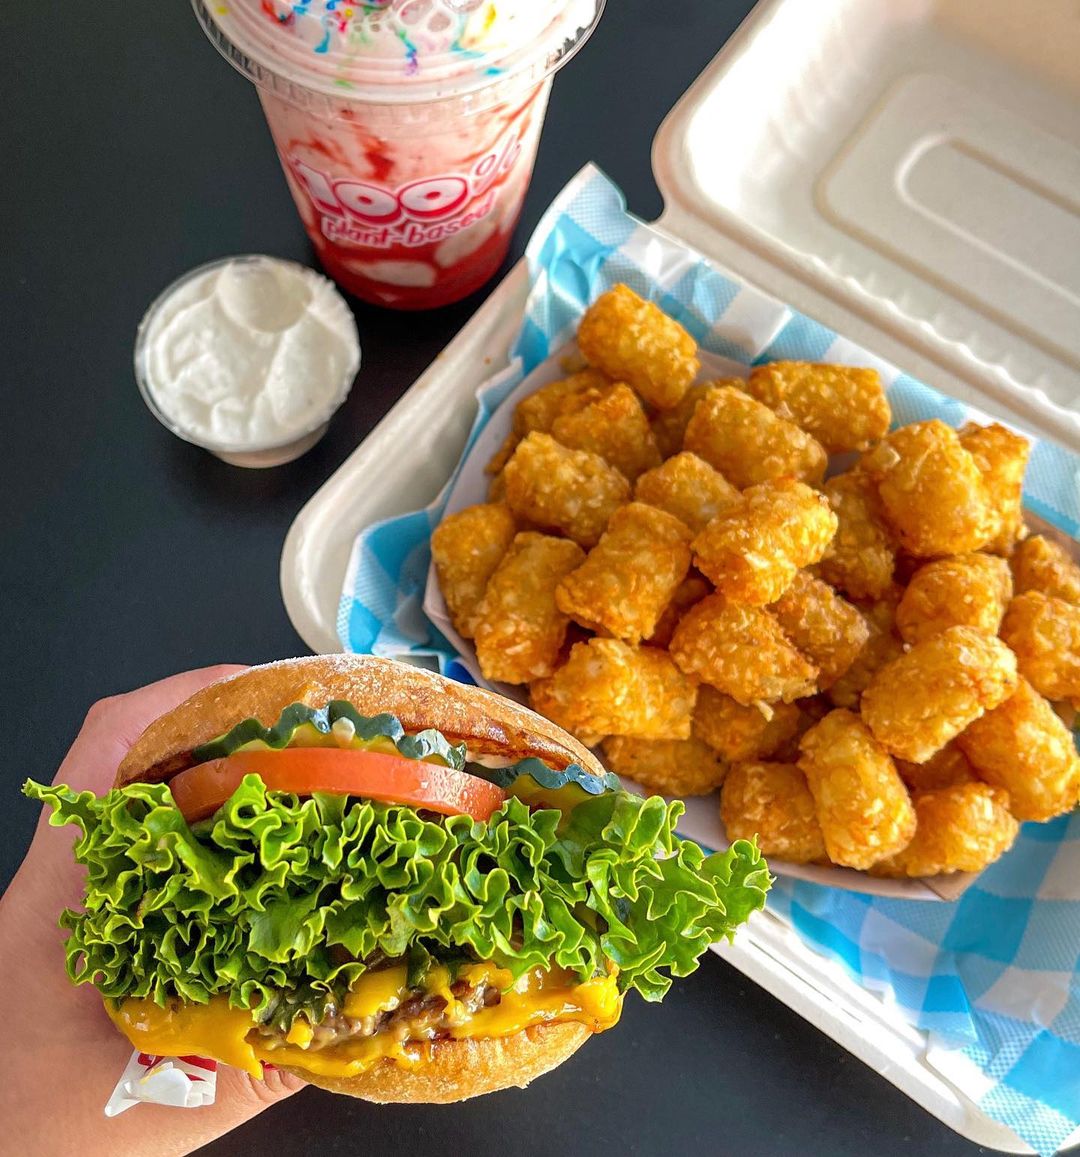 Delicious-looking impossible cheeseburger photoed with tater tots and a fruit-based smoothie. Photo by Instagram user @itsairamsveganvida.